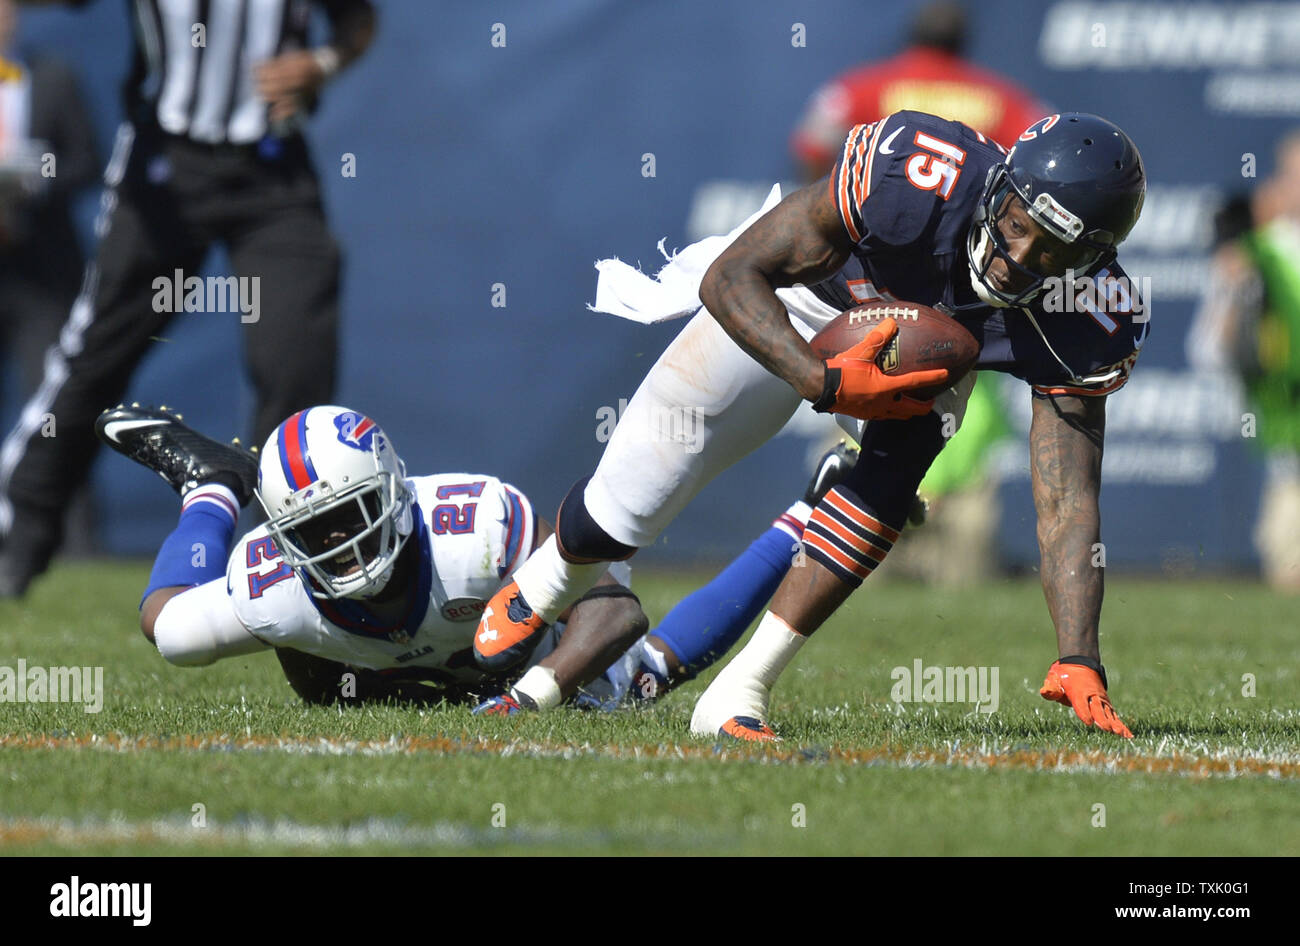 Chicago Bears wide receiver Brandon Marshall falls as Buffalo Bills cornerback Leodis McKelvin defends after Marshall caught a pass for a 15-yard gain during the fourth quarter at Soldier Field on September 7, 2014 in Chicago. The Bills defeated the Bears 23-20 in overtime.     UPI/Brian Kersey Stock Photo